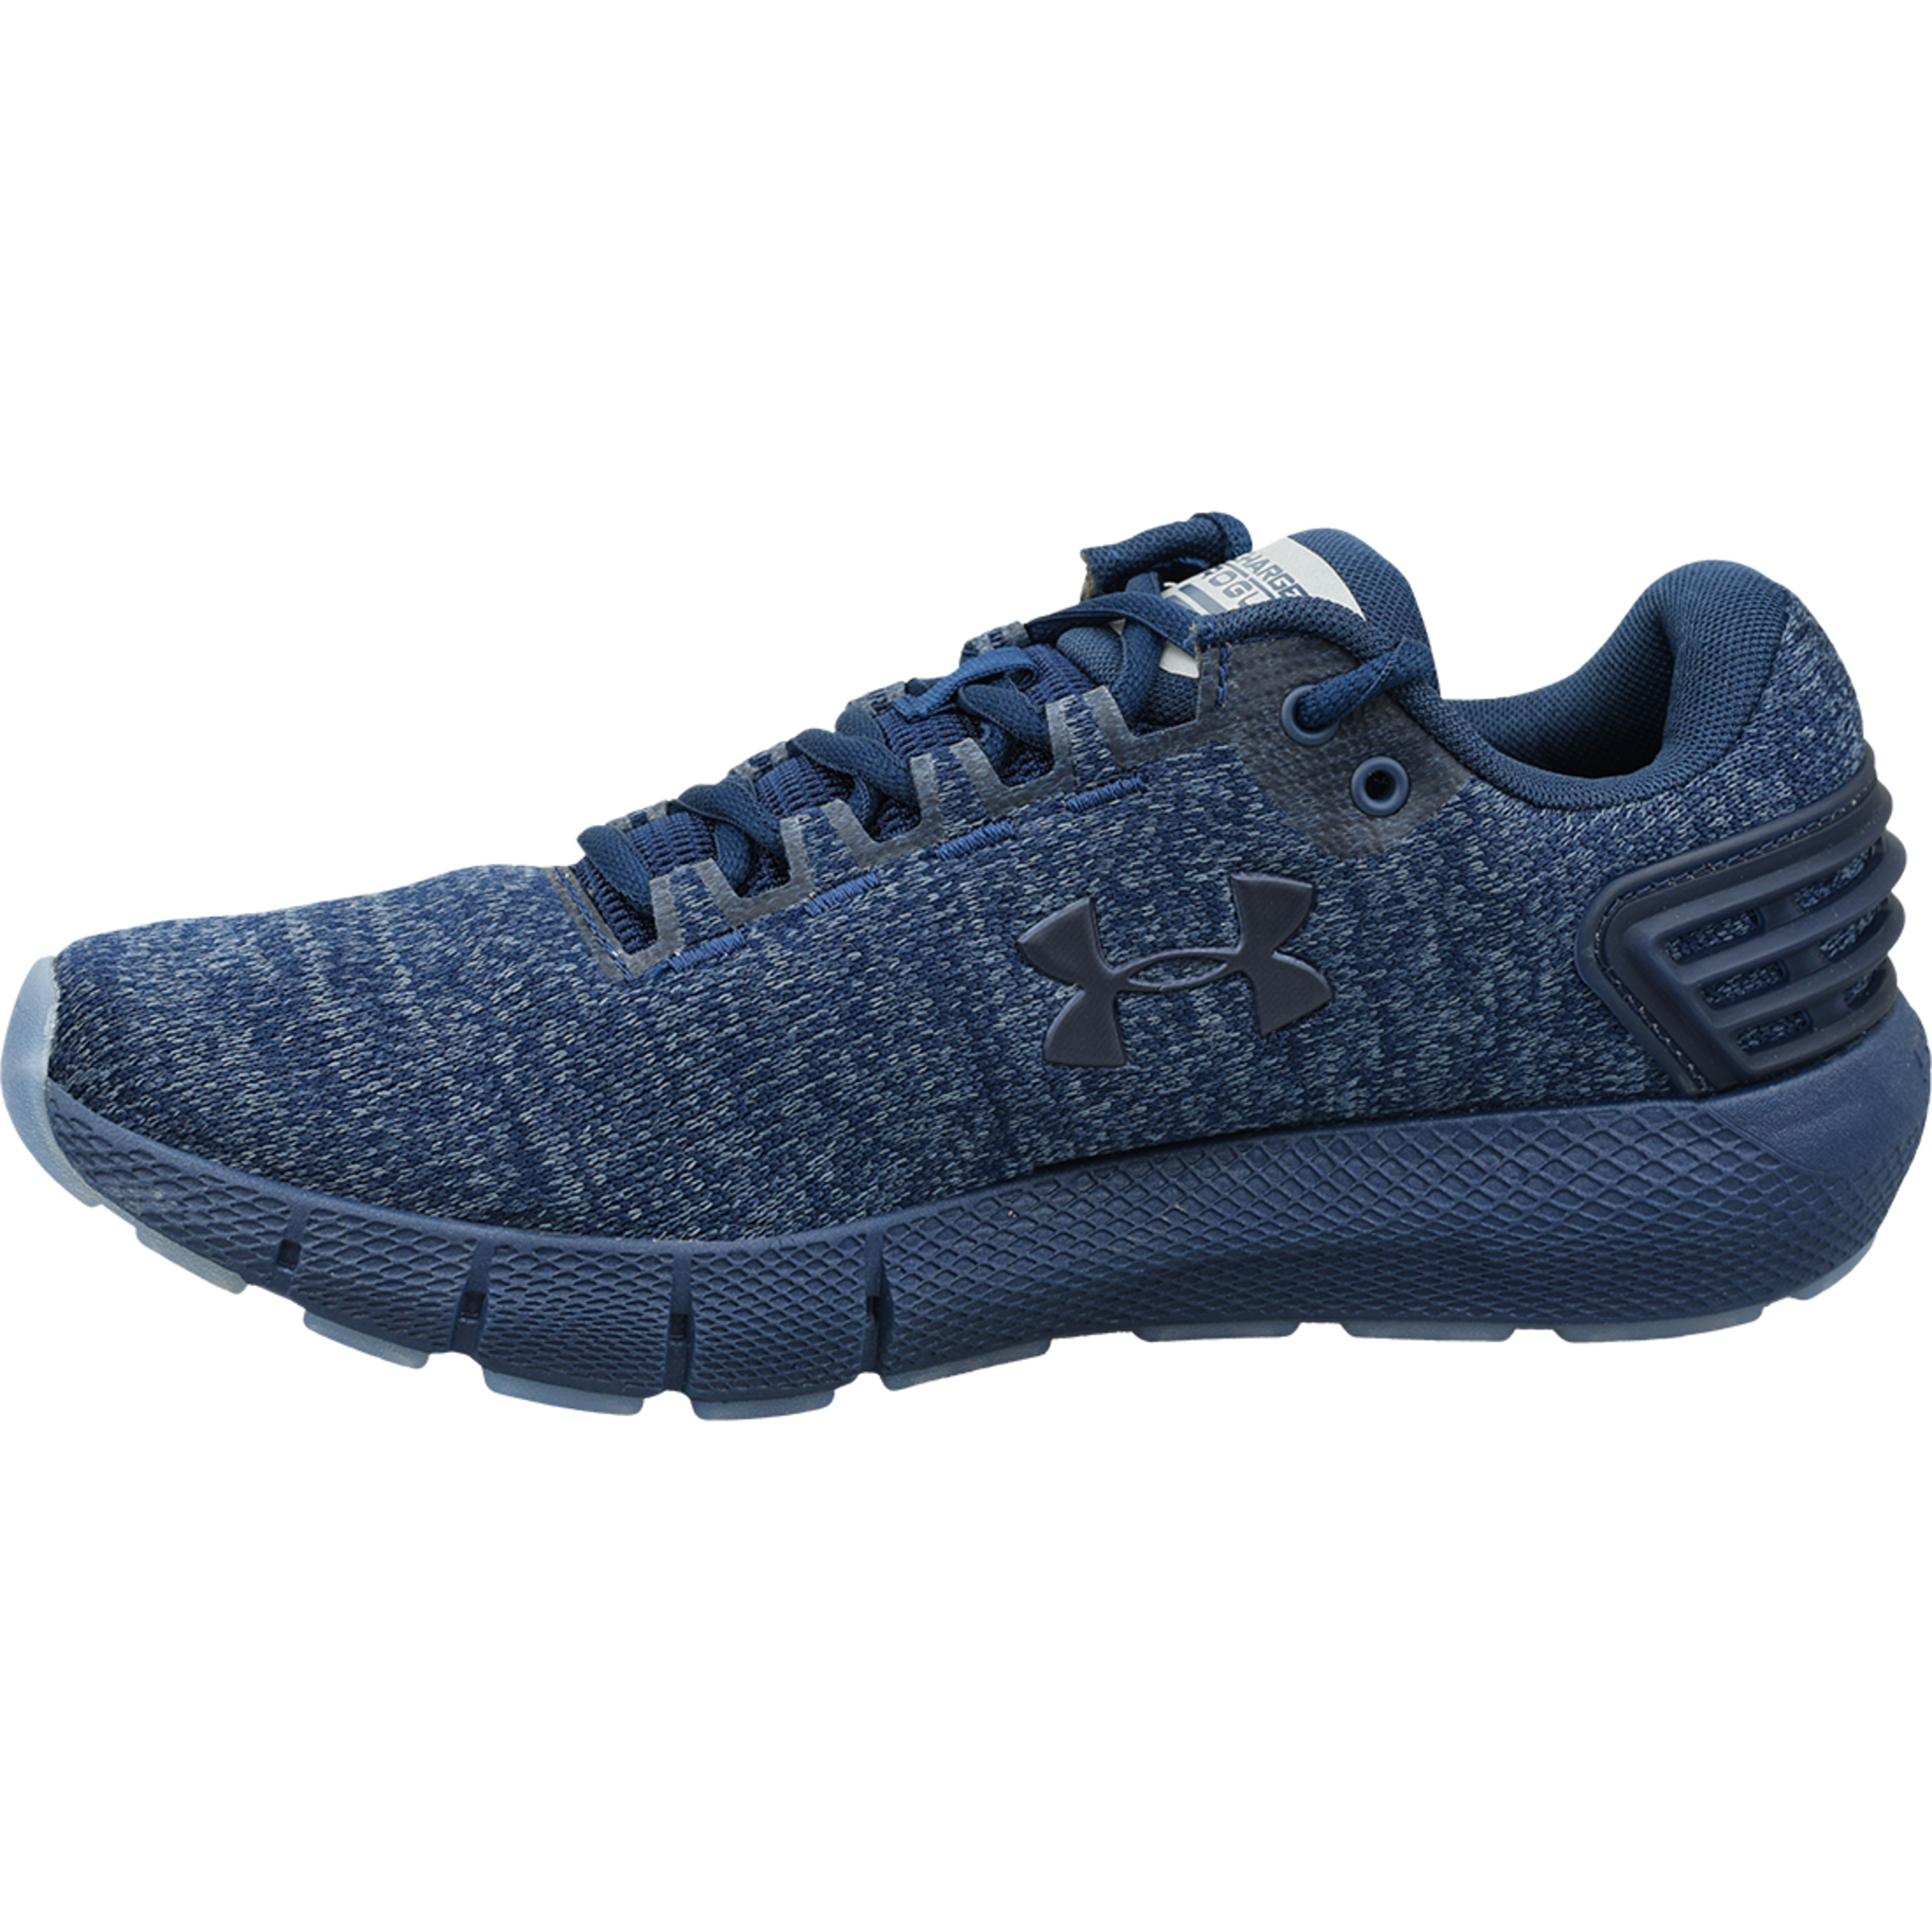 Zapatillas Under Armour Charged Rogue Twist Ice 3022674-400